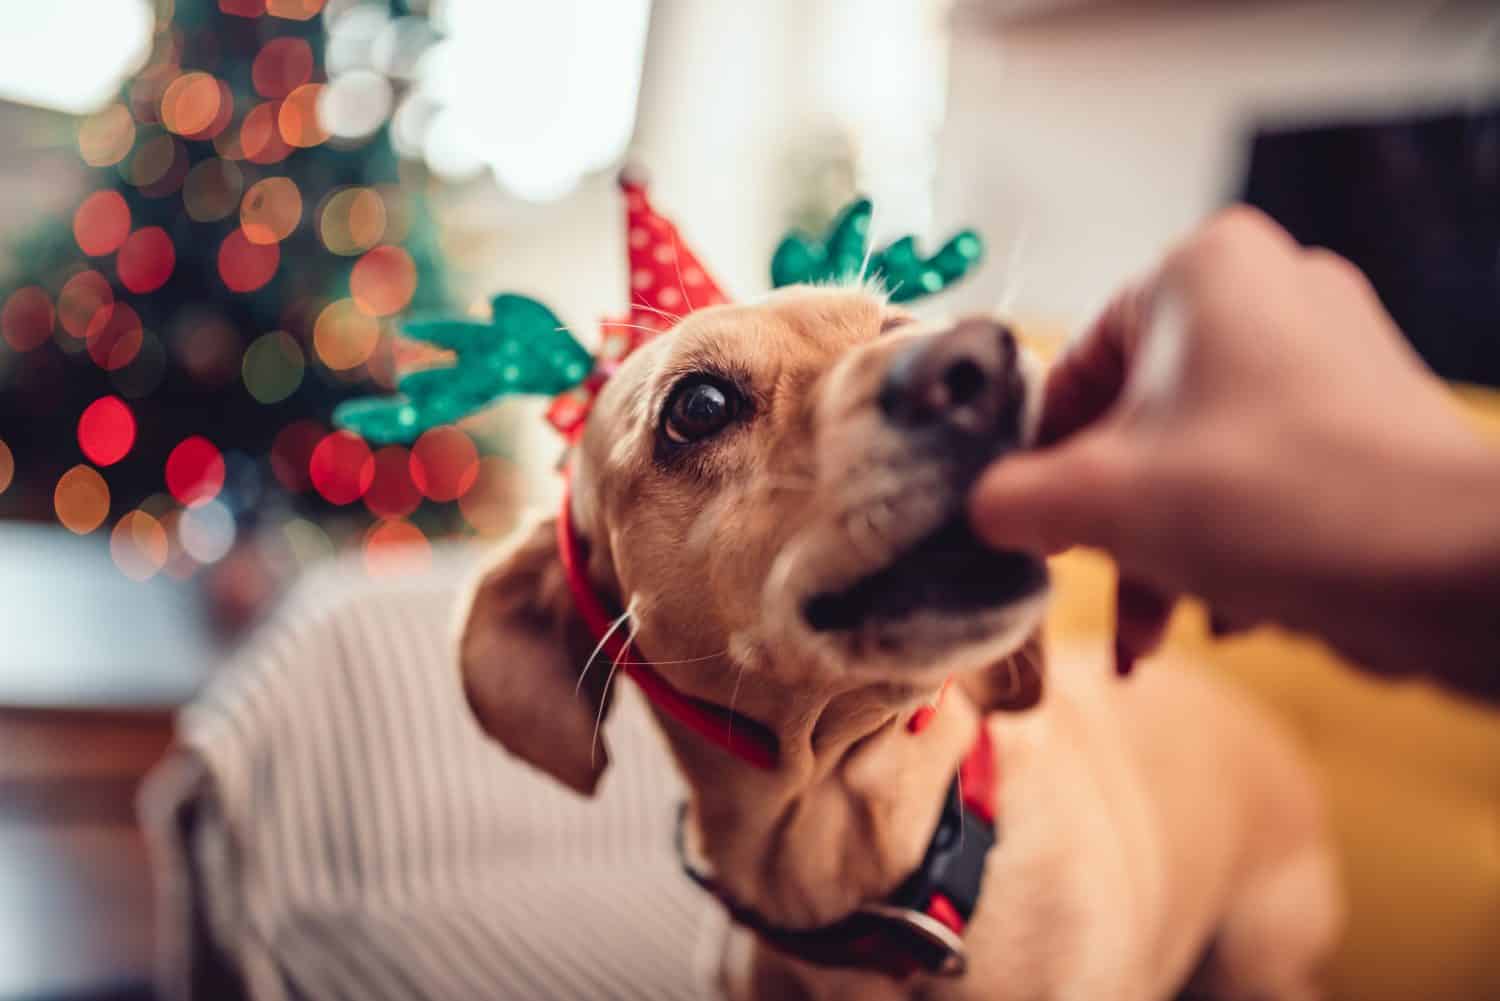 Woman feeding small yellow dog wearing antlers on the sofa by the Christmas tree